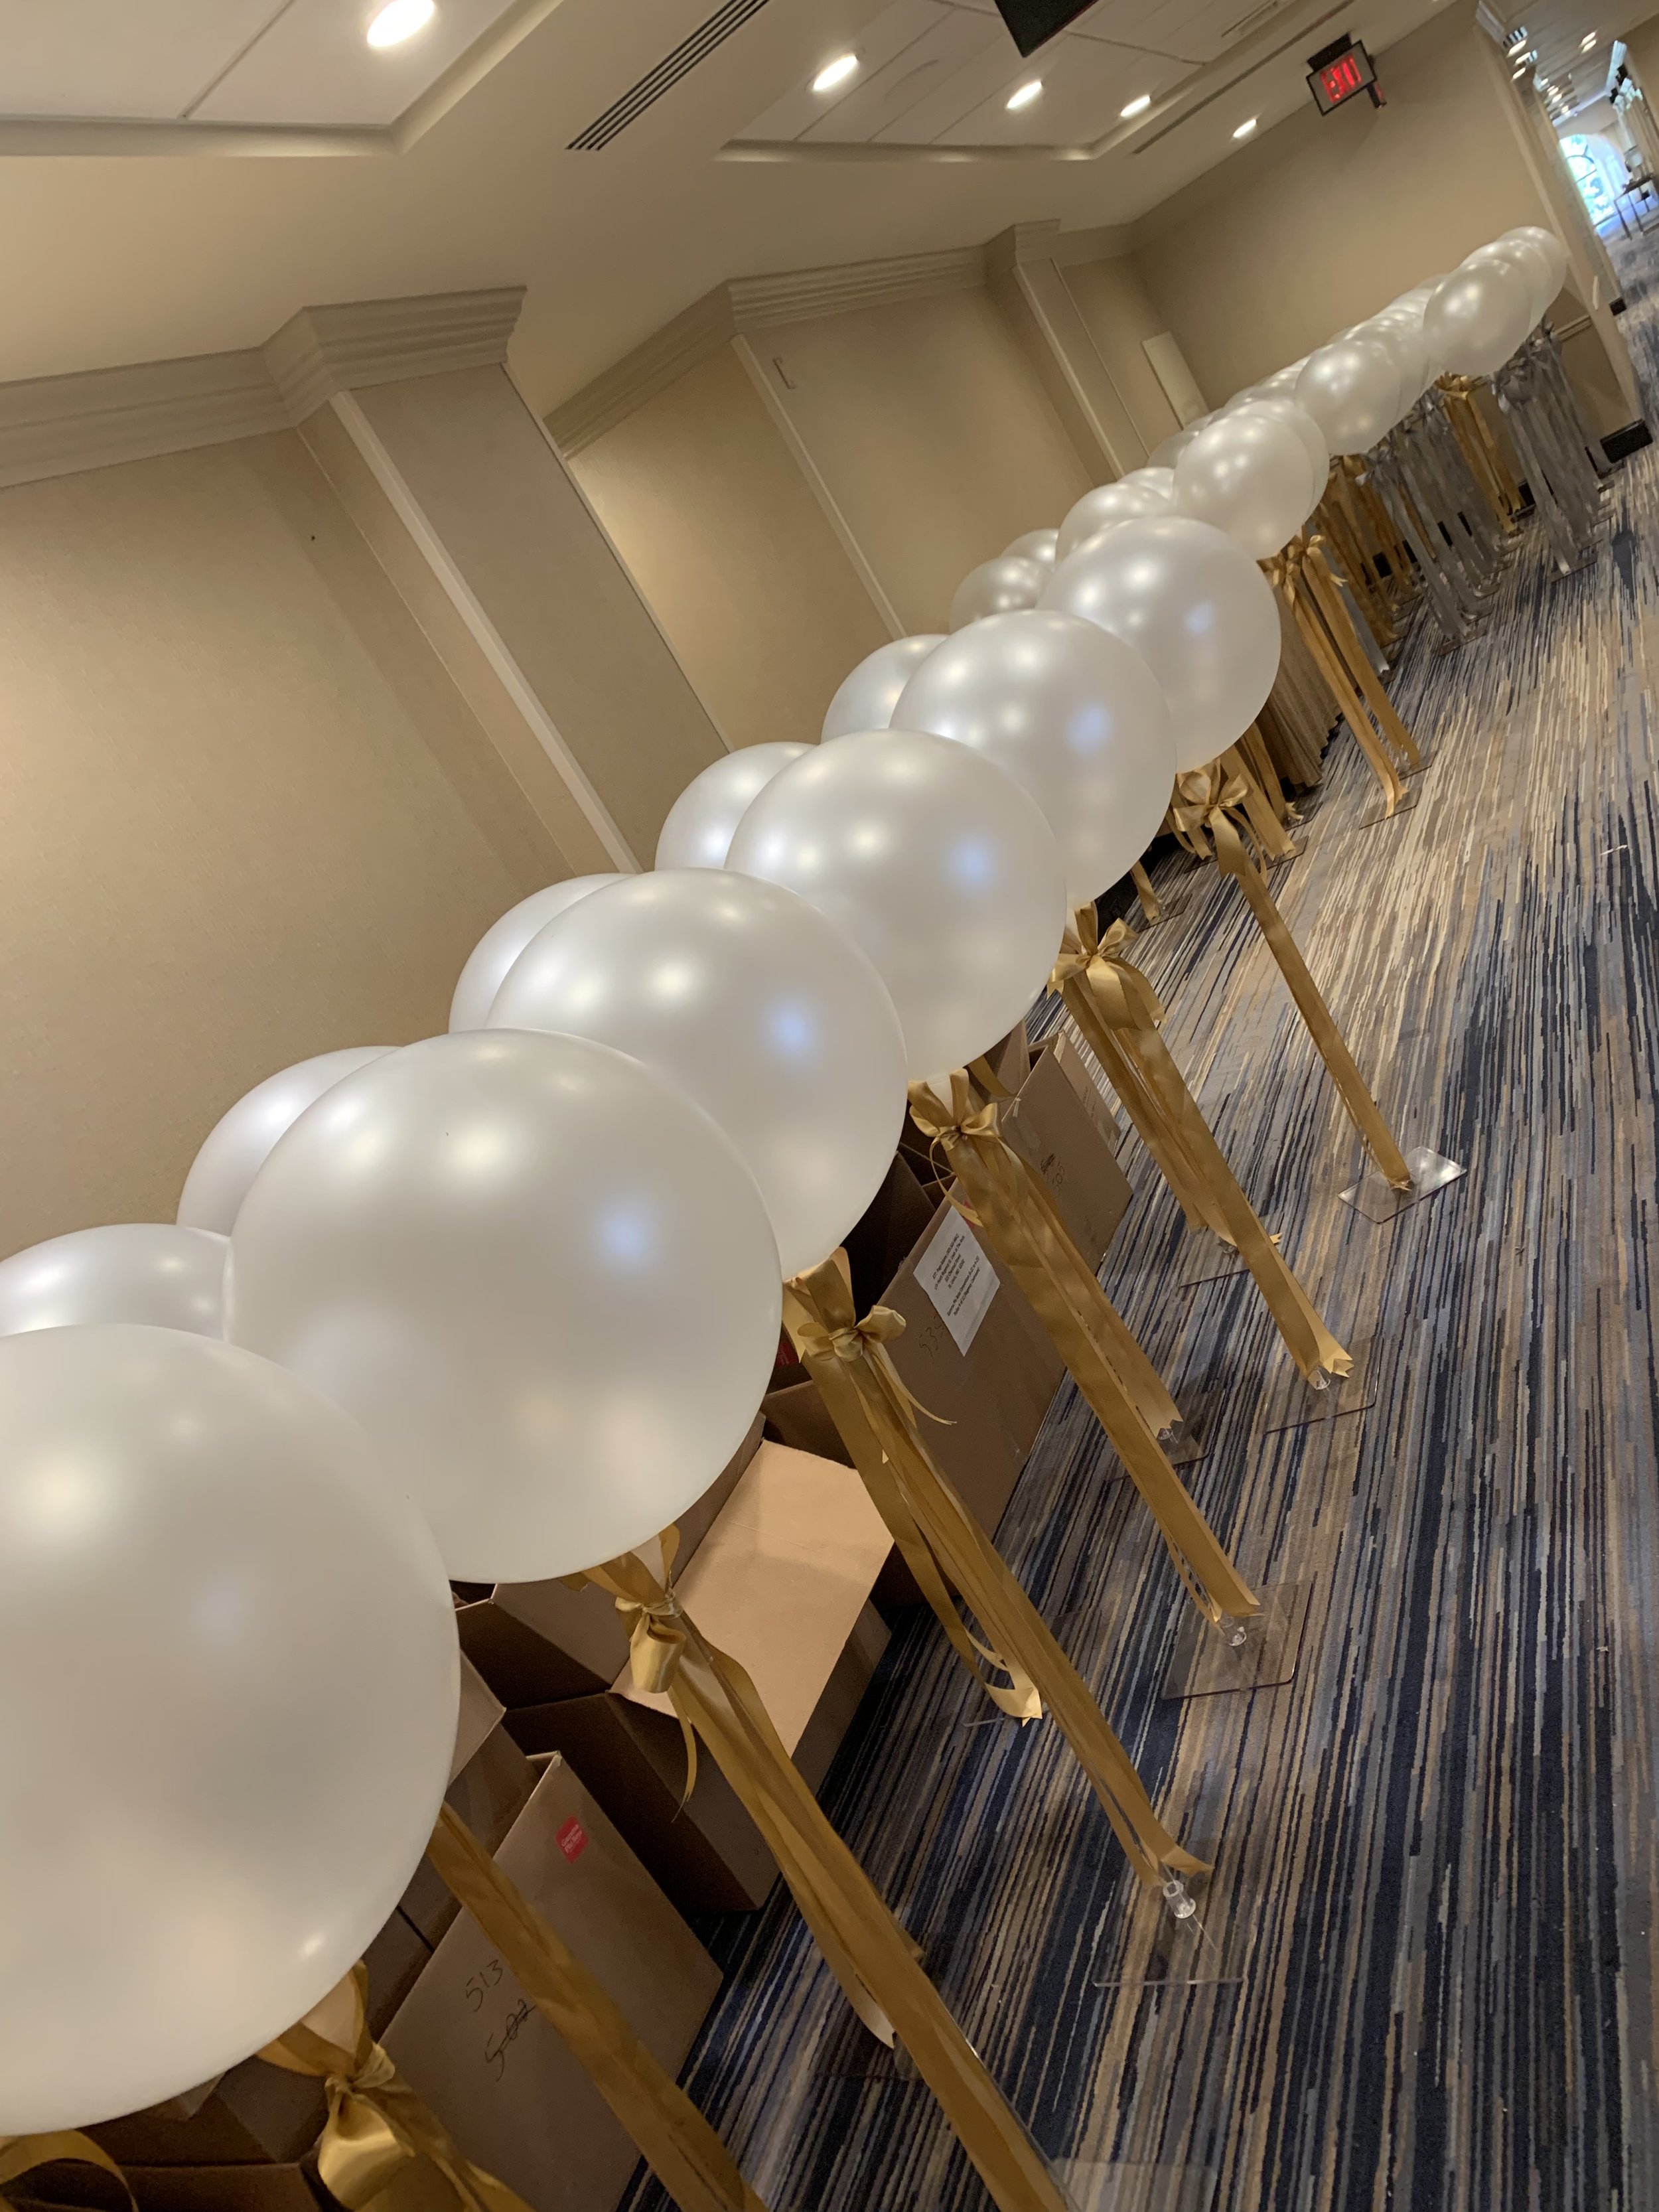 Corporate Event Balloons - Balloon Theory St. Louis